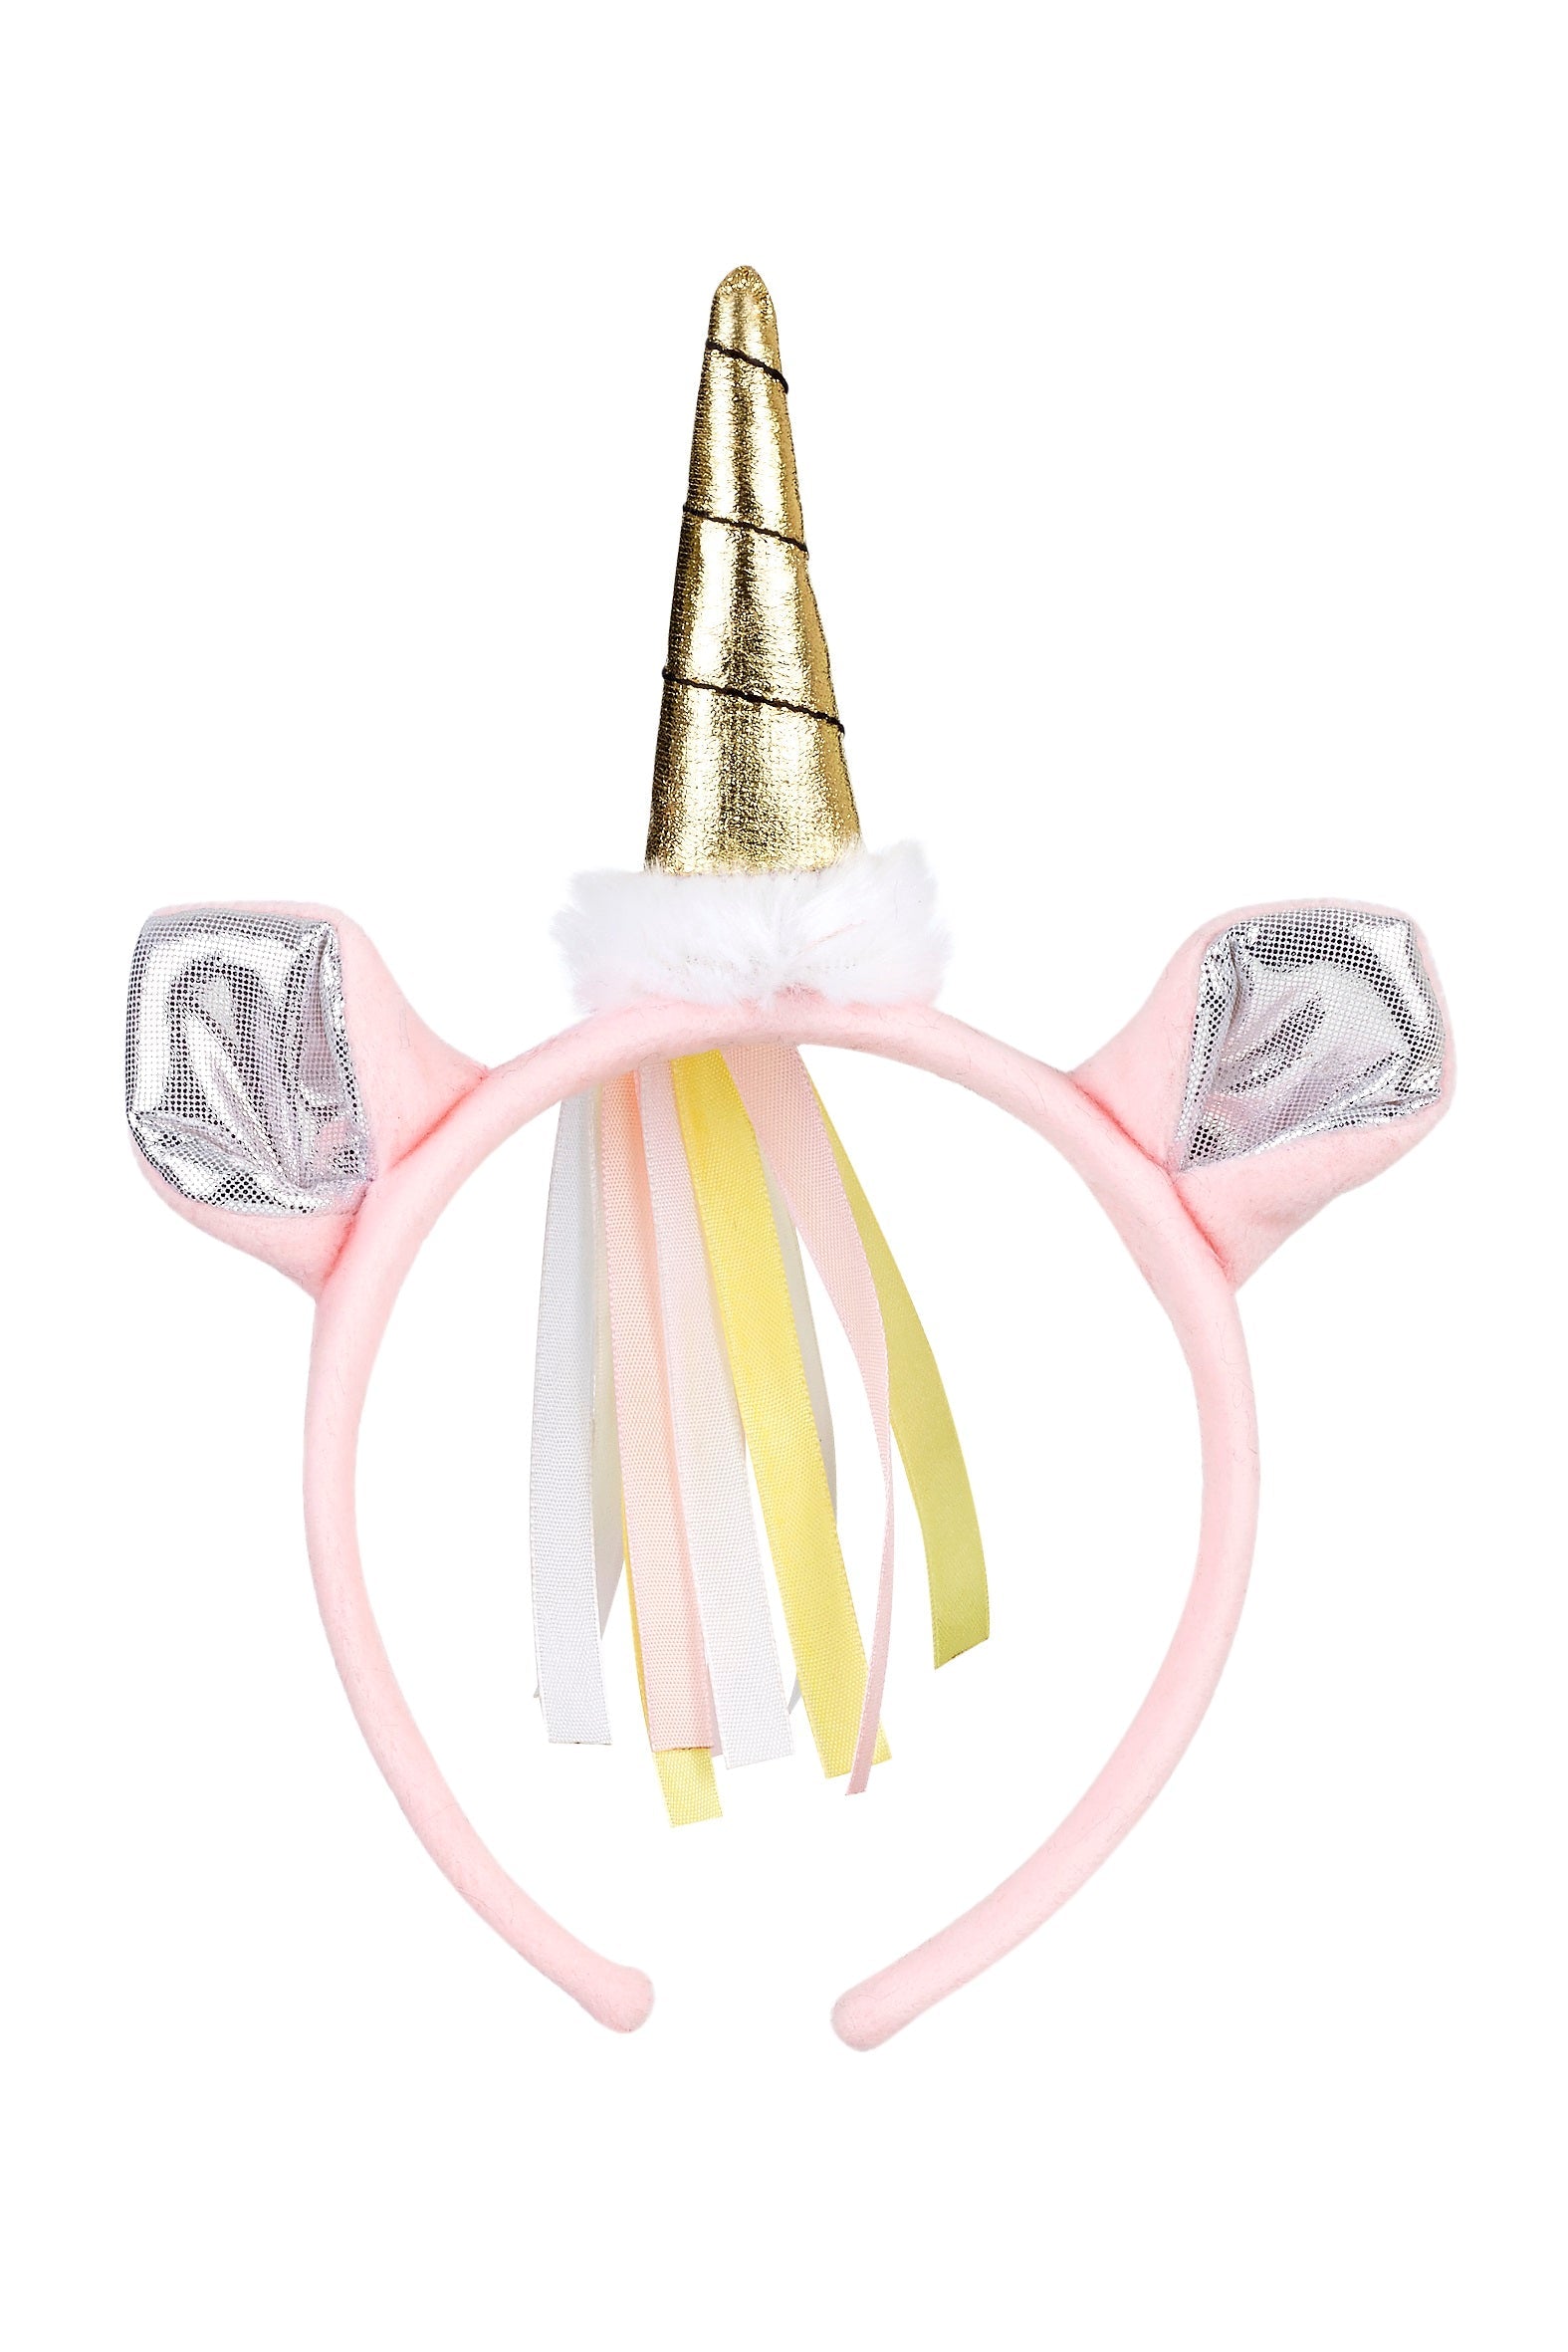 <p>Adorable Souza headband in pink with a fine unicorn horn in gold and ears in silver at the top.</p>
<p>The Souza hairband has a round head shape and decorative ribbons at the back in pink, white and yellow. The Hairband has a nice unicorn horn in metallic gold at the top and two fine ears with a metallic, silver inside. The Hairband is perfect for costume.</p>
<h5>Specifications</h5>
<p><strong>Color</strong>: Pink<br><strong>Material</strong>: Plastic-100% polyester<br><strong>Size</strong>: The Hairband measures 15 in all the way around<br><strong>Weight (lbs)</strong>: 0,11</p>
